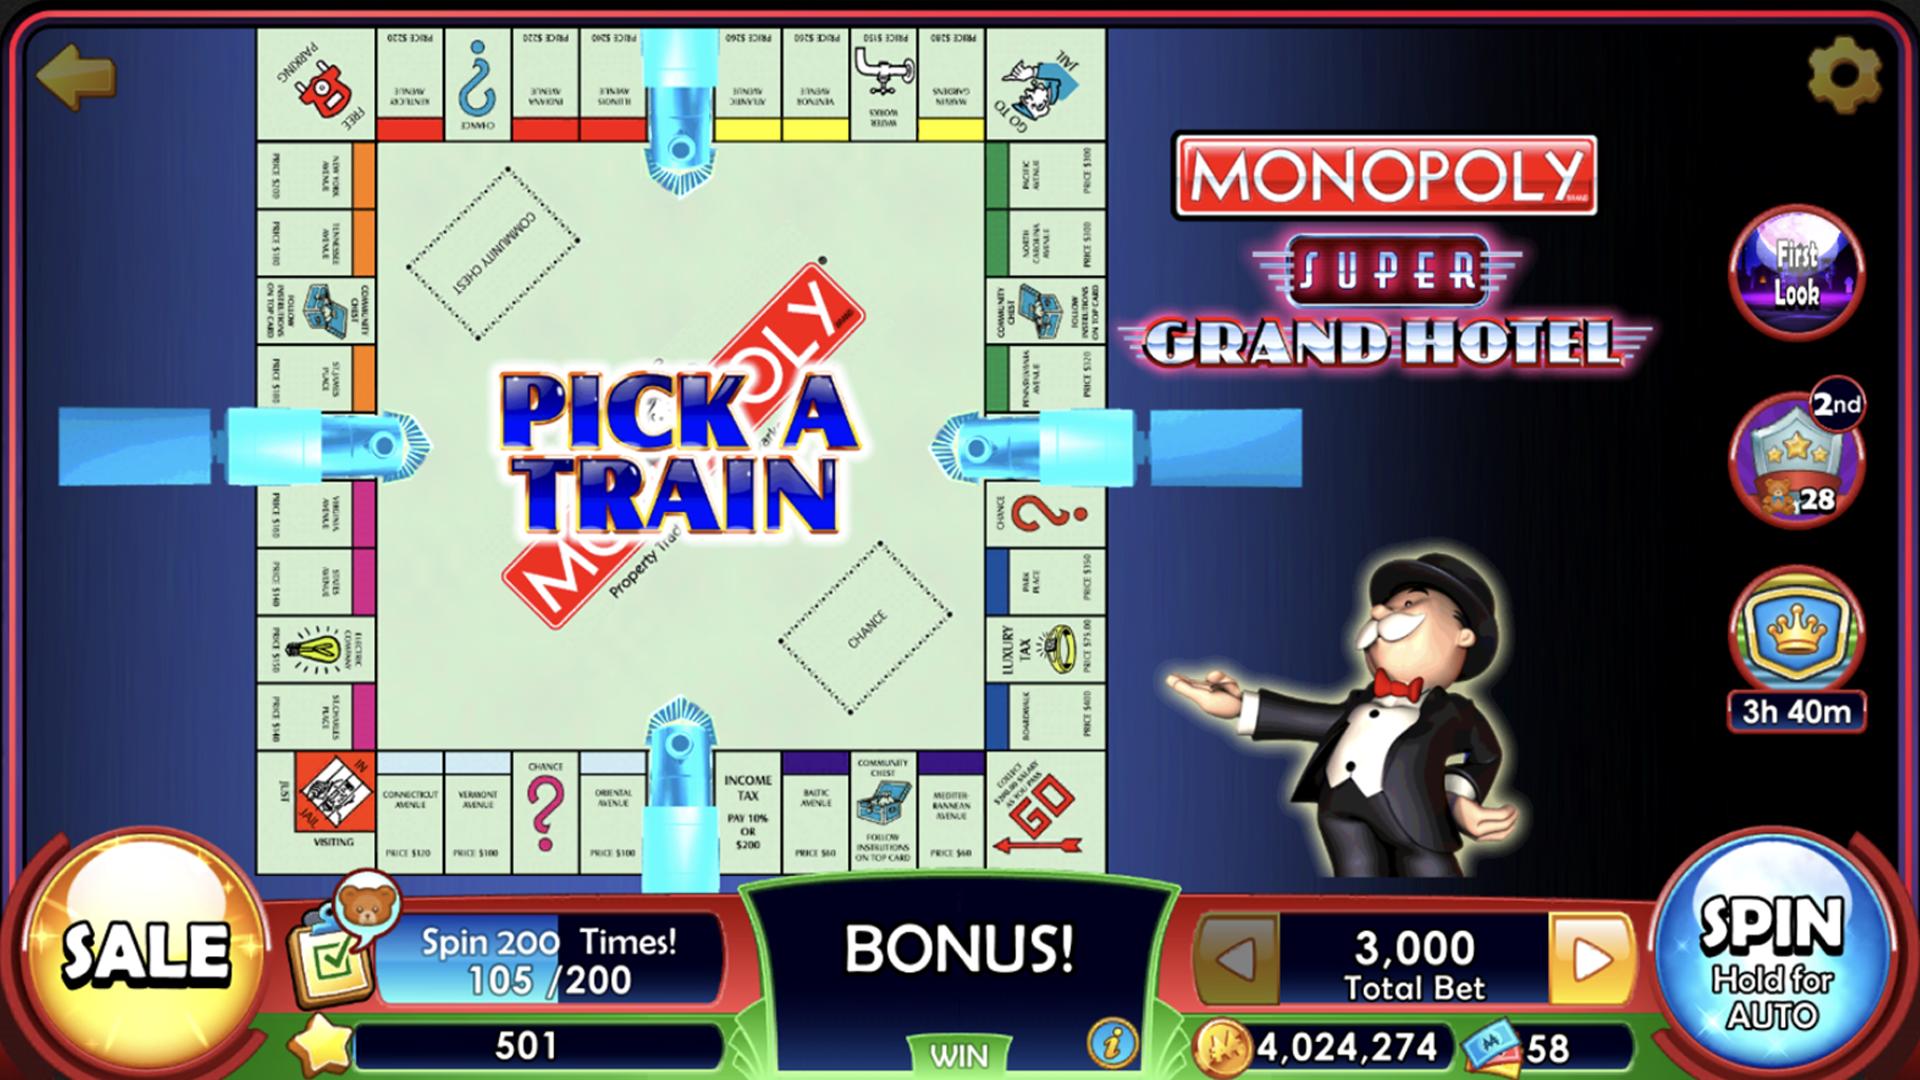 facebook monopoly slots free coins